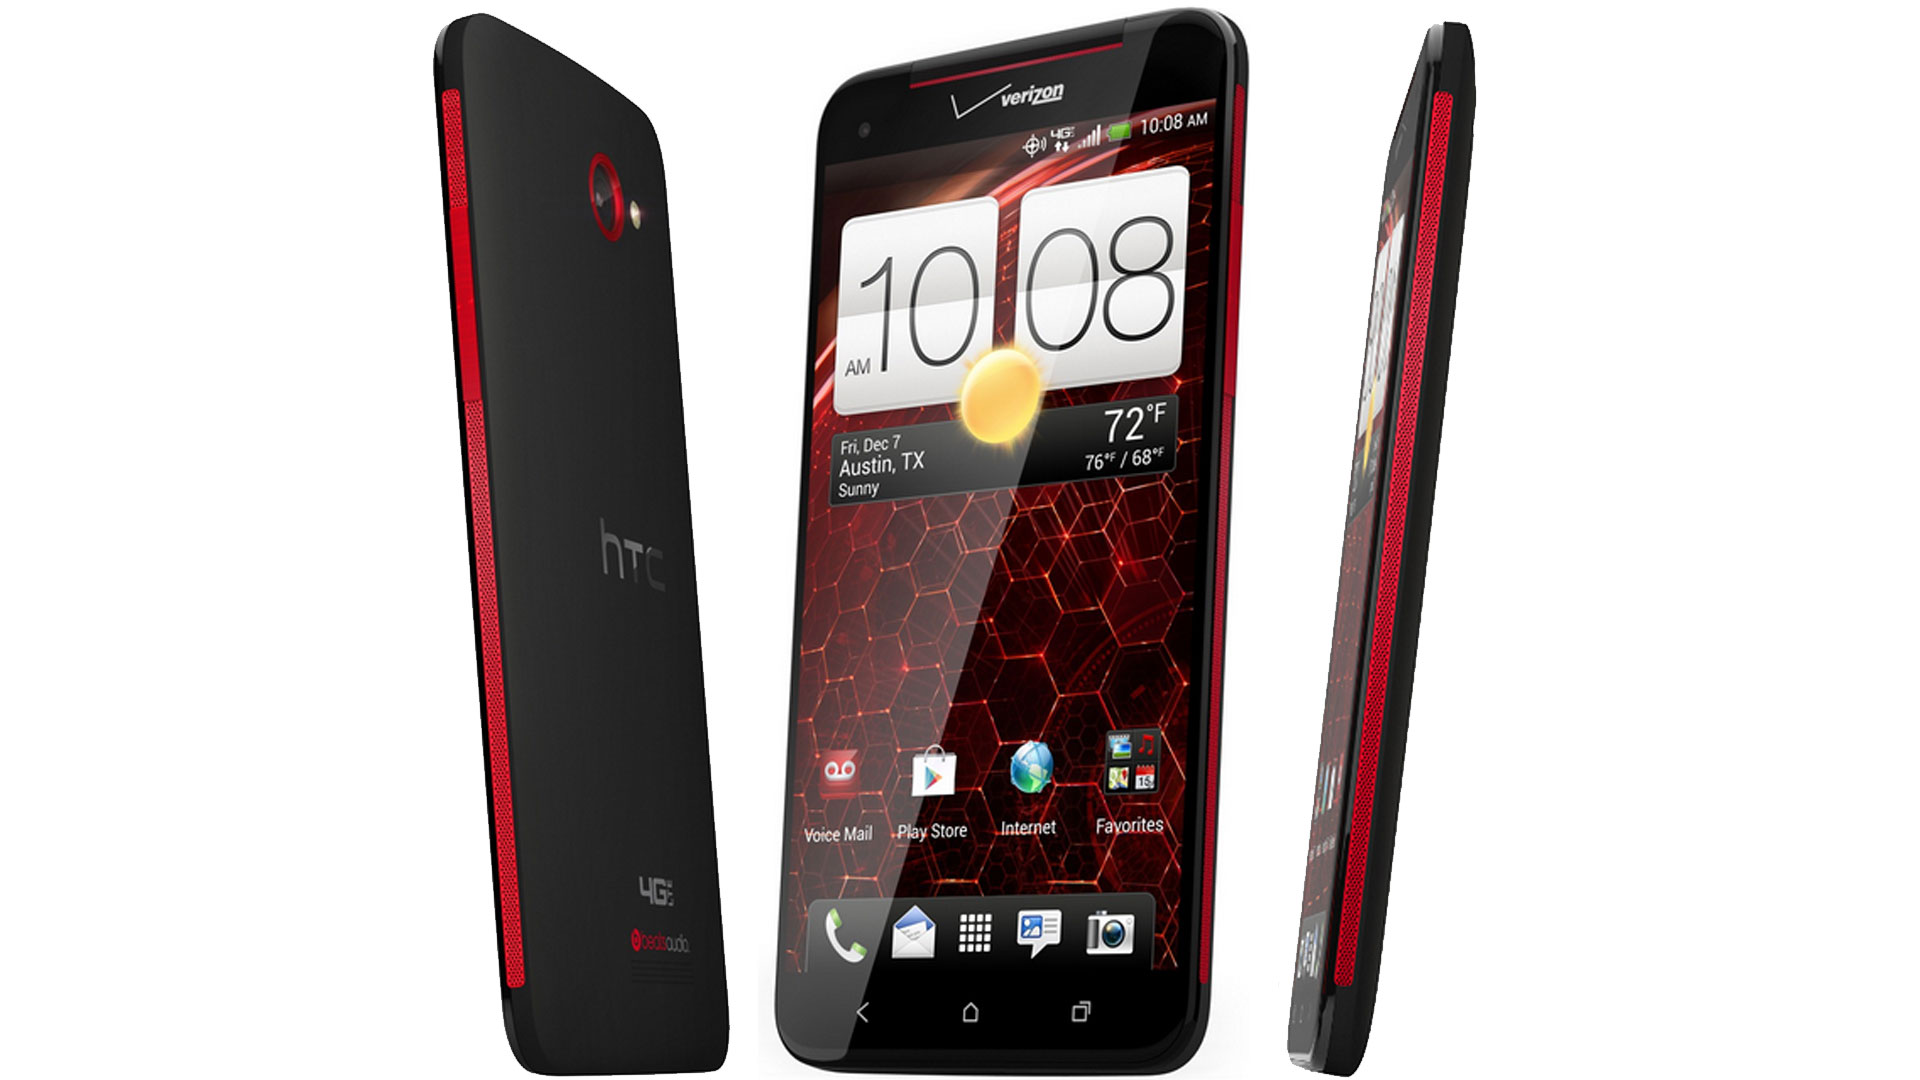 new-htc-droid-dna-specs-and-price-wallpaper1.jpg